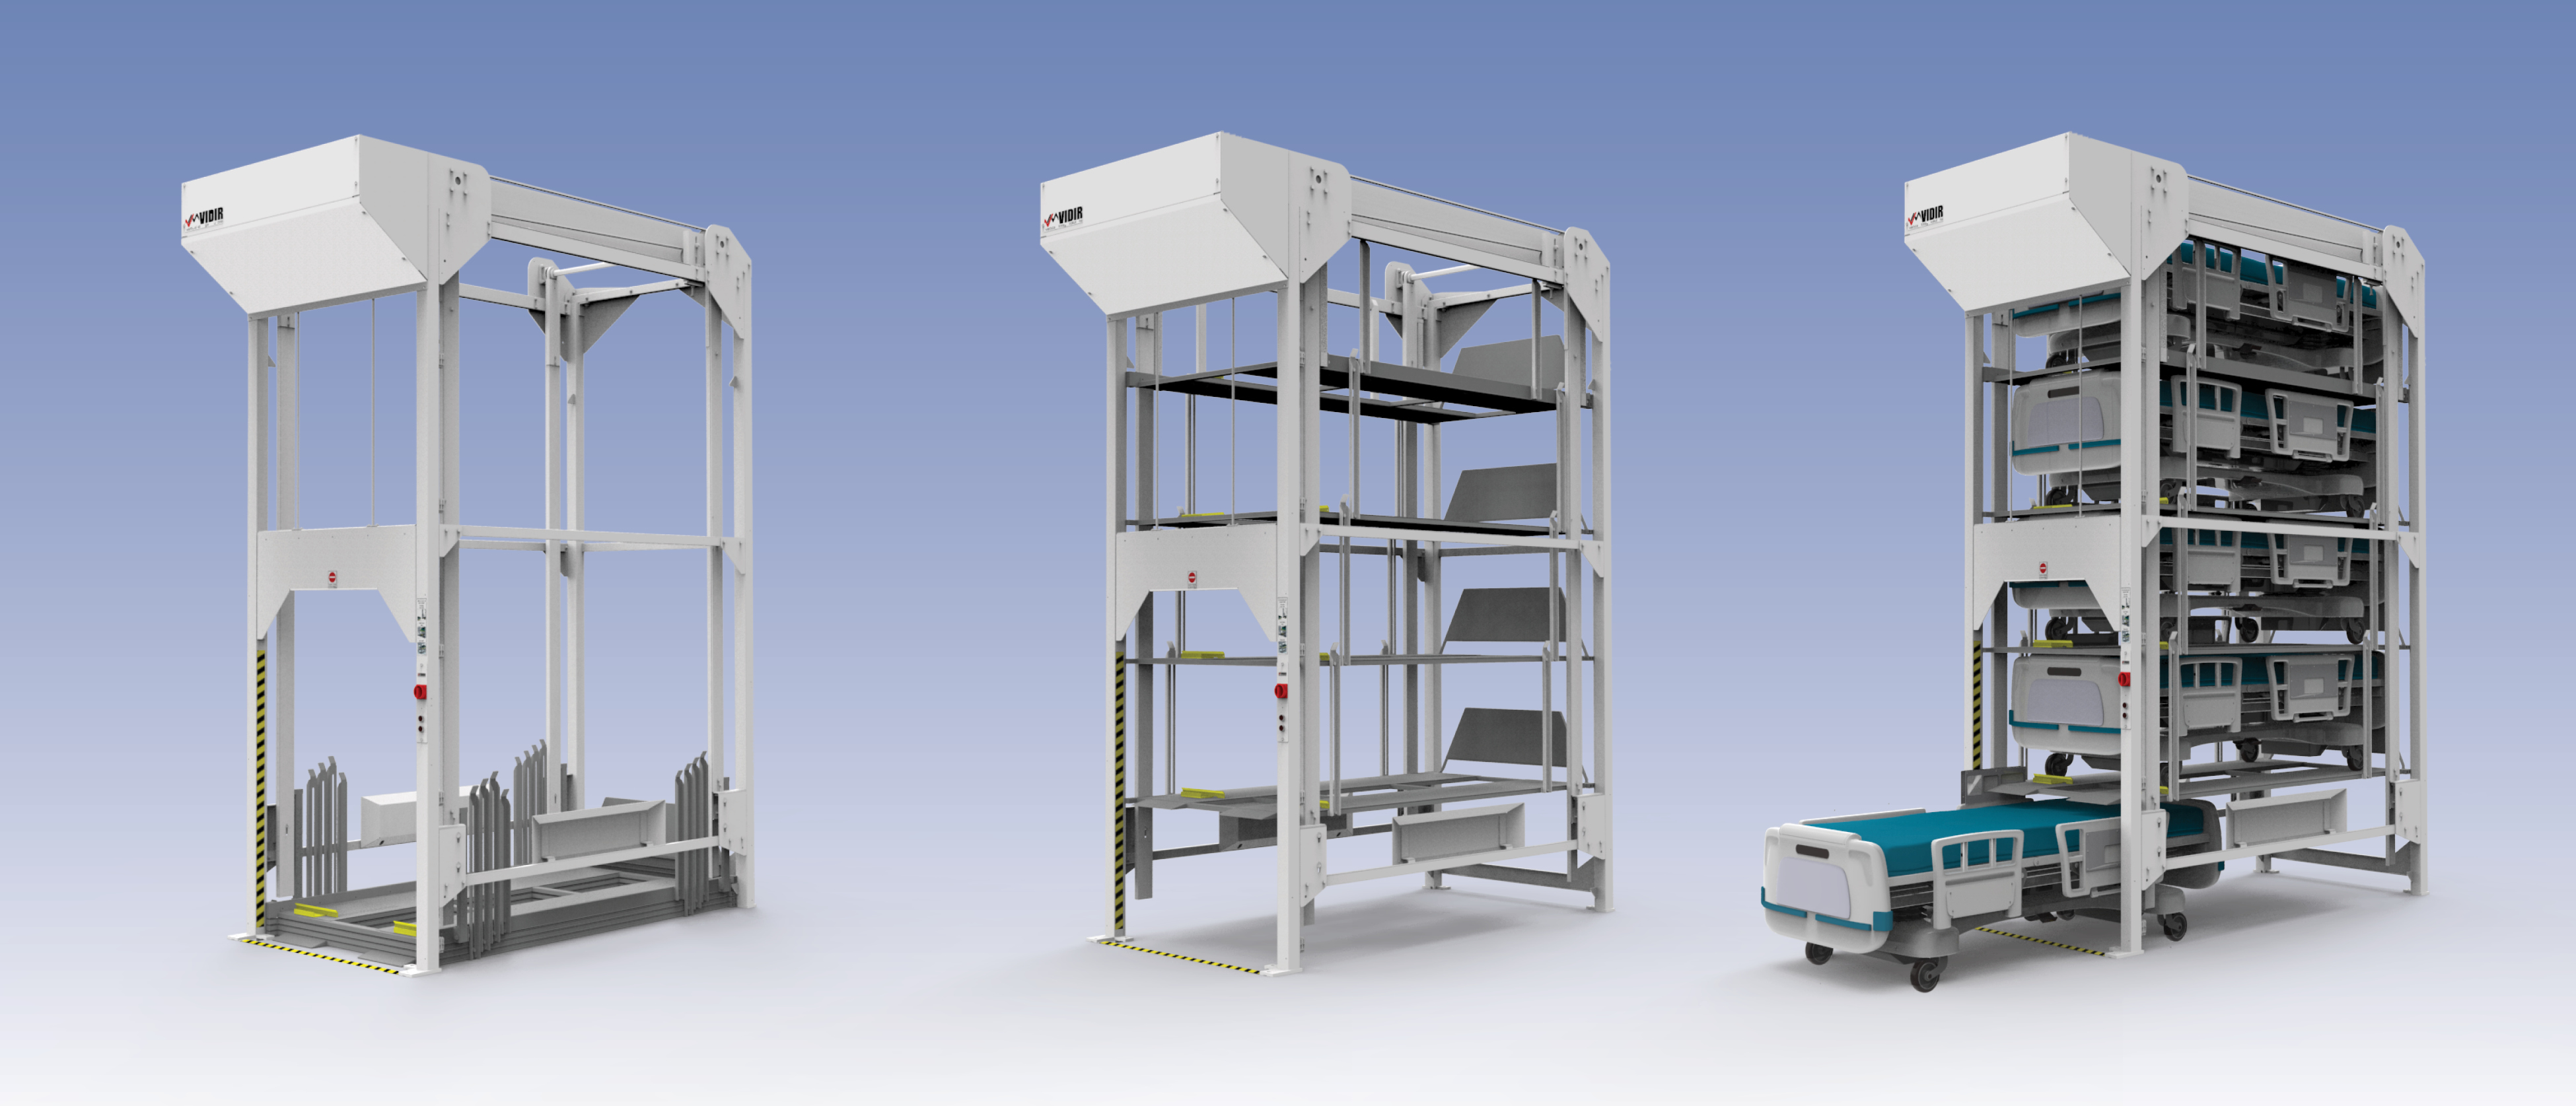 Vertical Bed Lifts Bring Lean Principles to Healthcare Operations